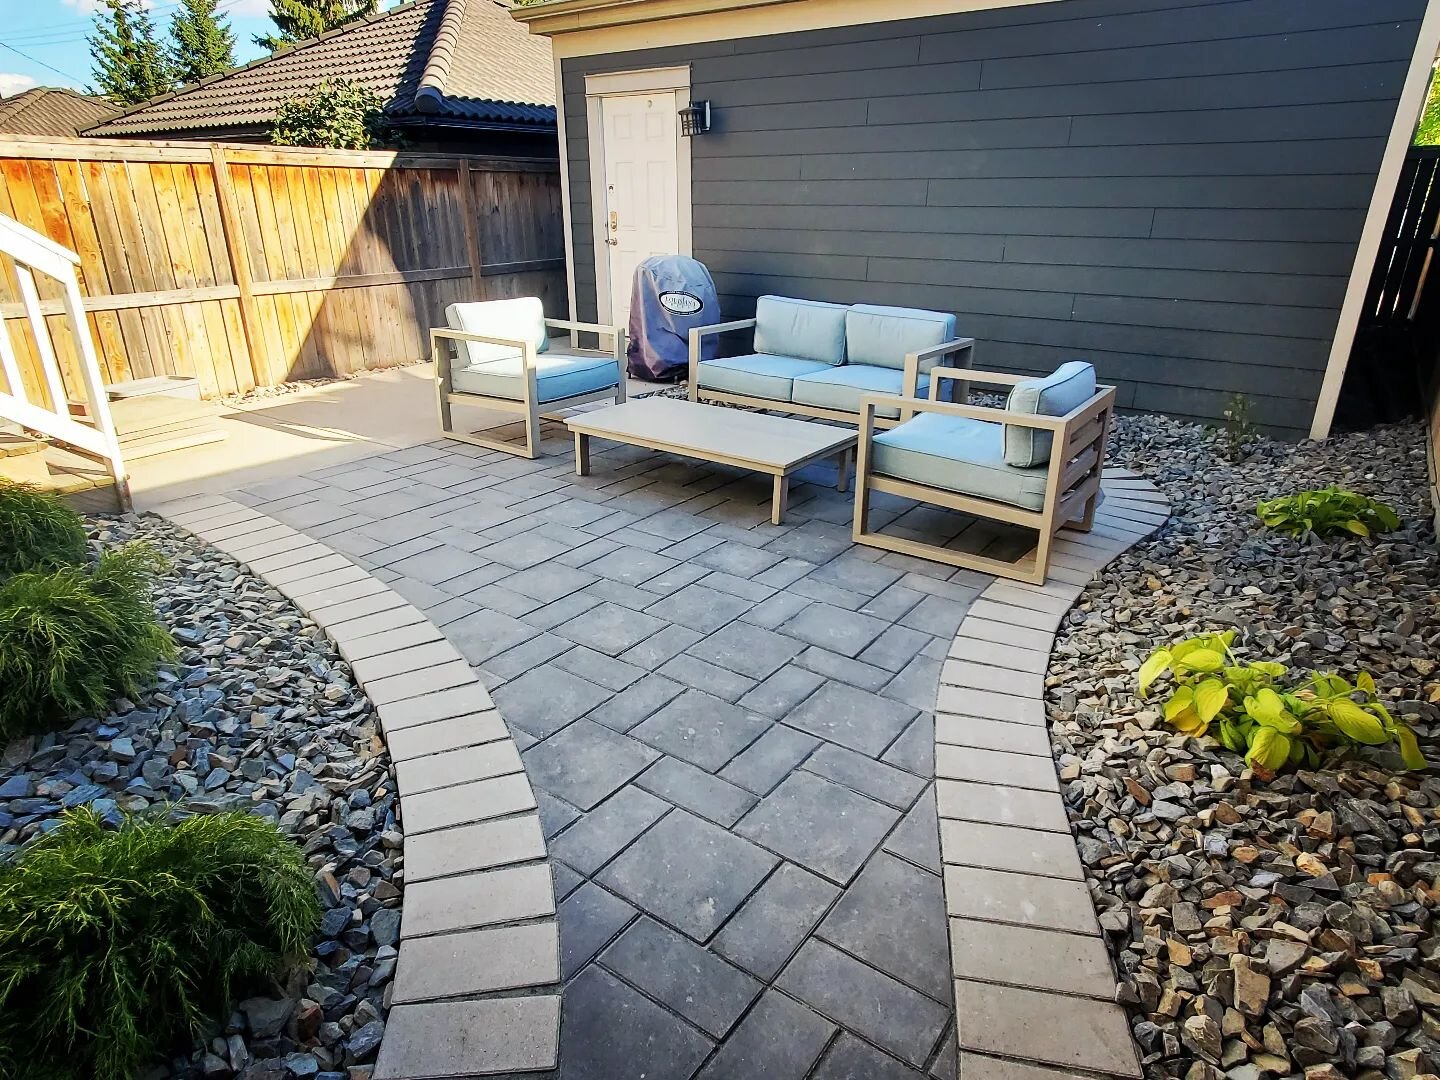 Patio season is just around the corner! 

This small little infill was a bunch of beat up grass until we created a perfect functional outdoor space.  From the boarder around the patio to the small low maintenance shrubs around it, our clients are lov